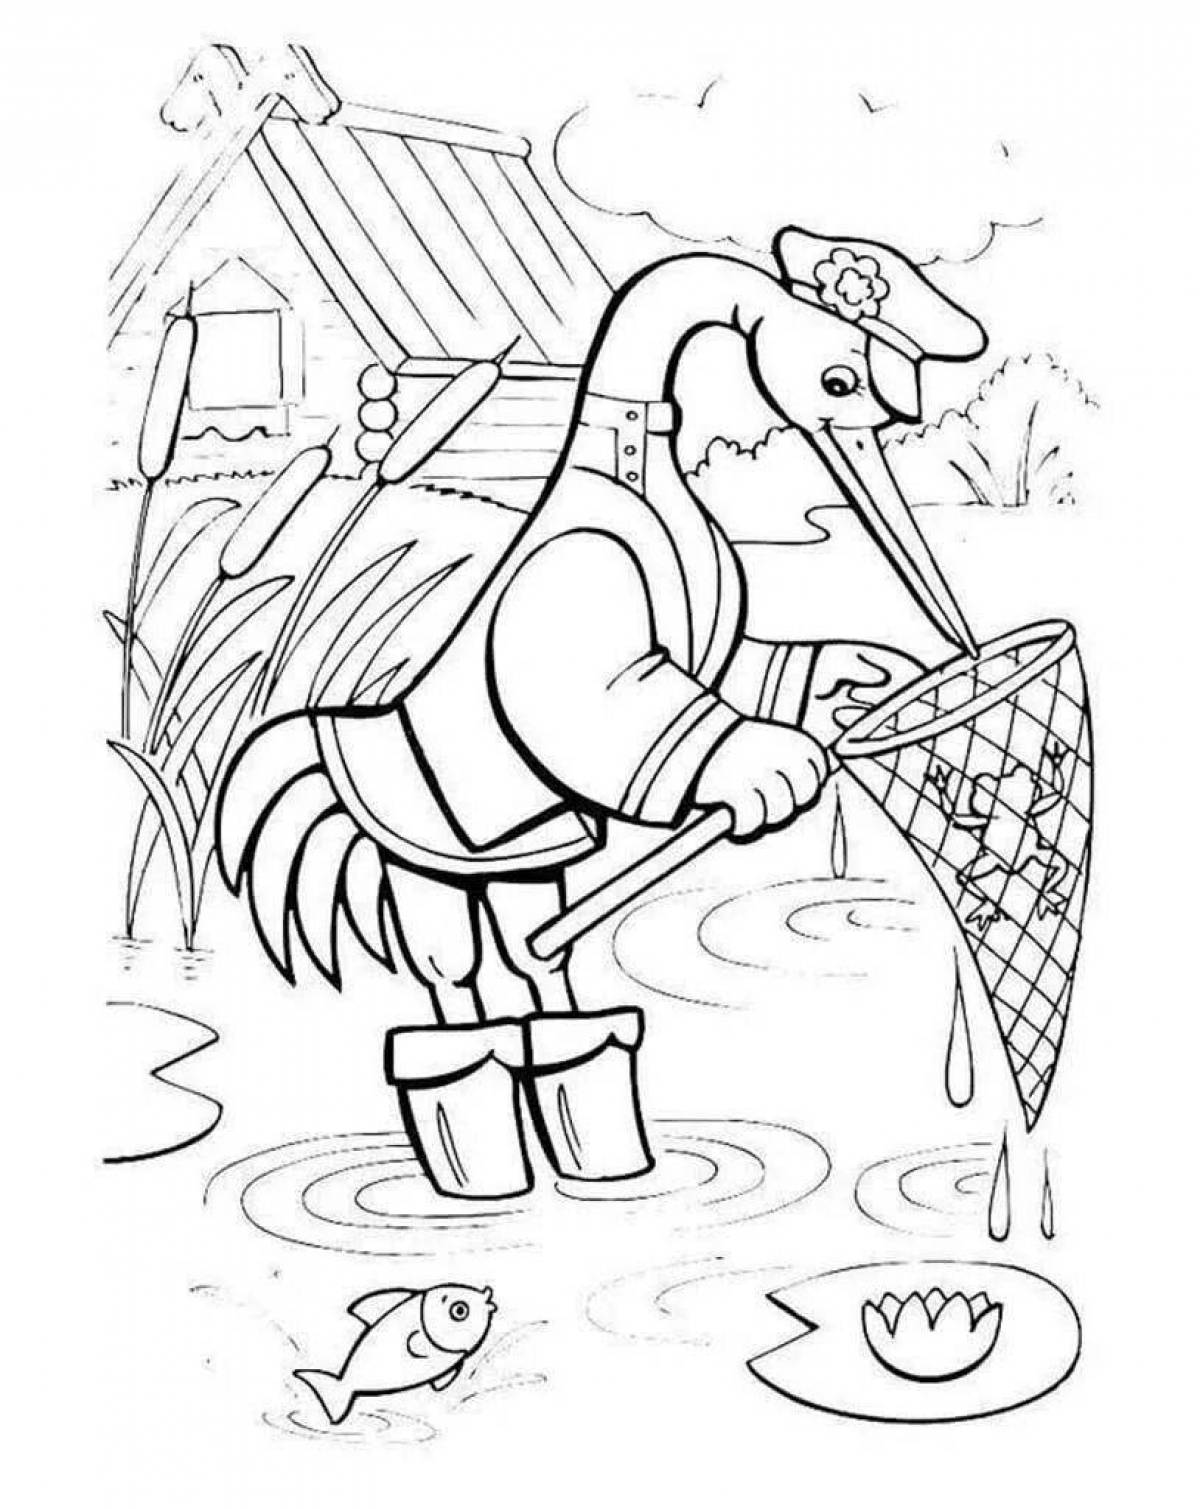 Creative fox and crane coloring book for kids